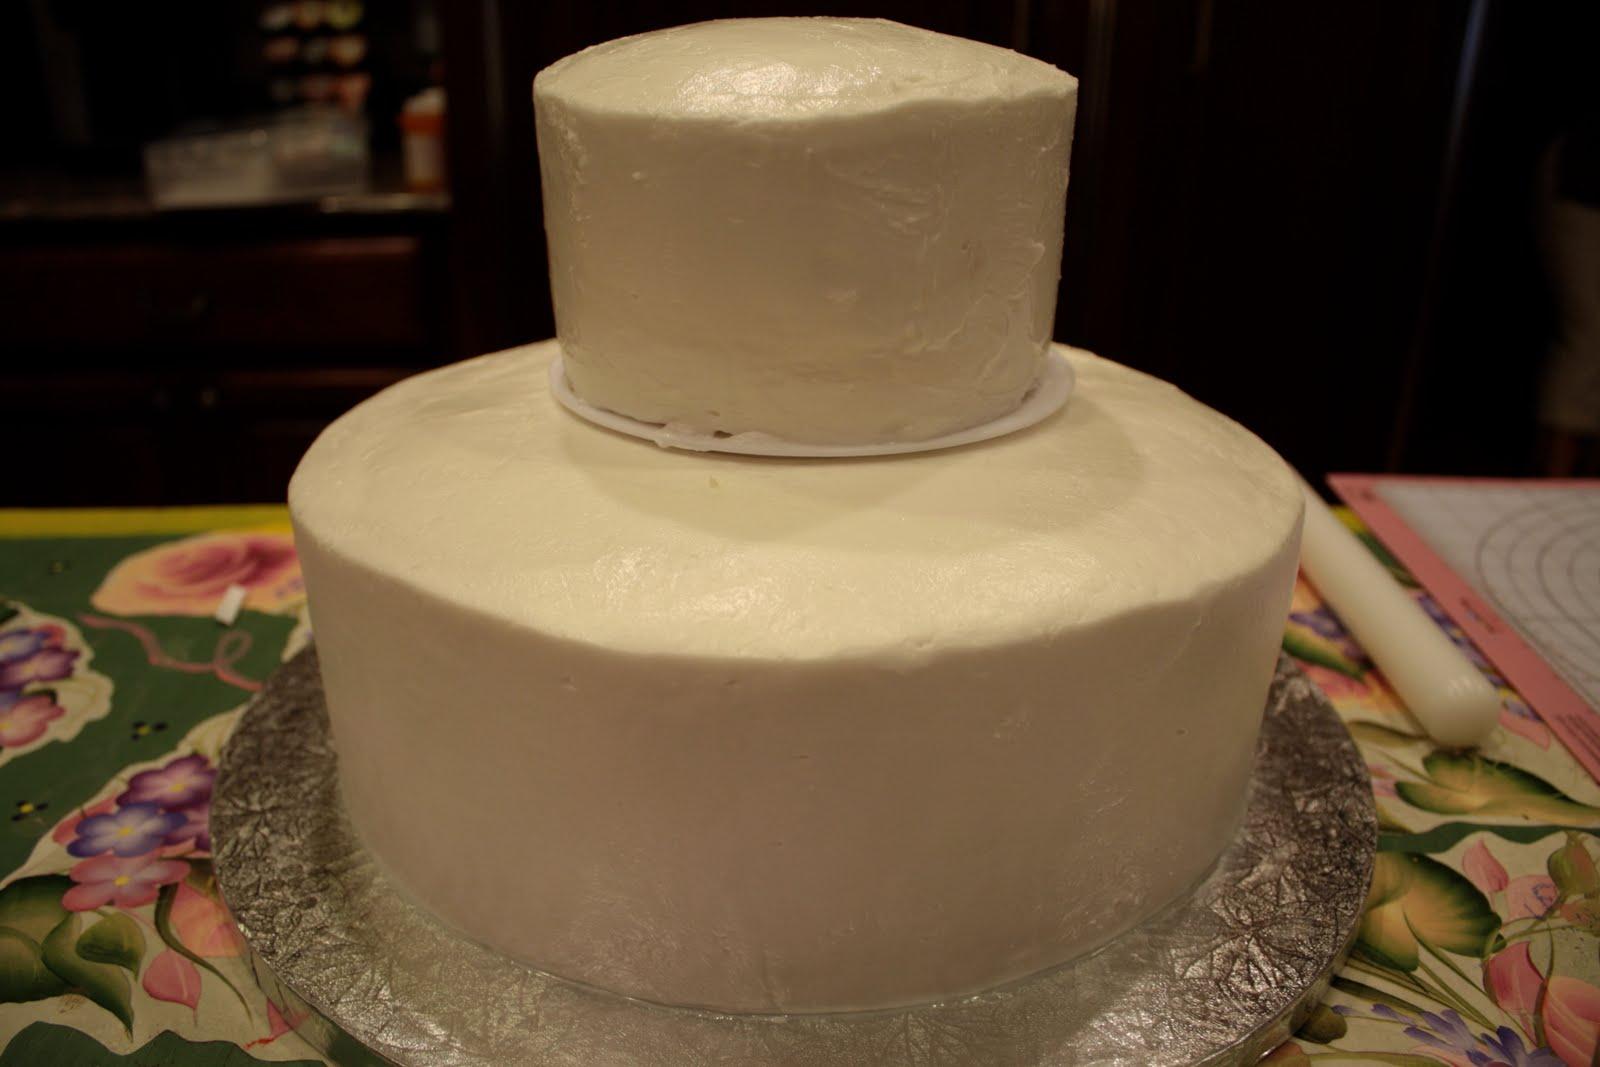 But for the wedding cake,